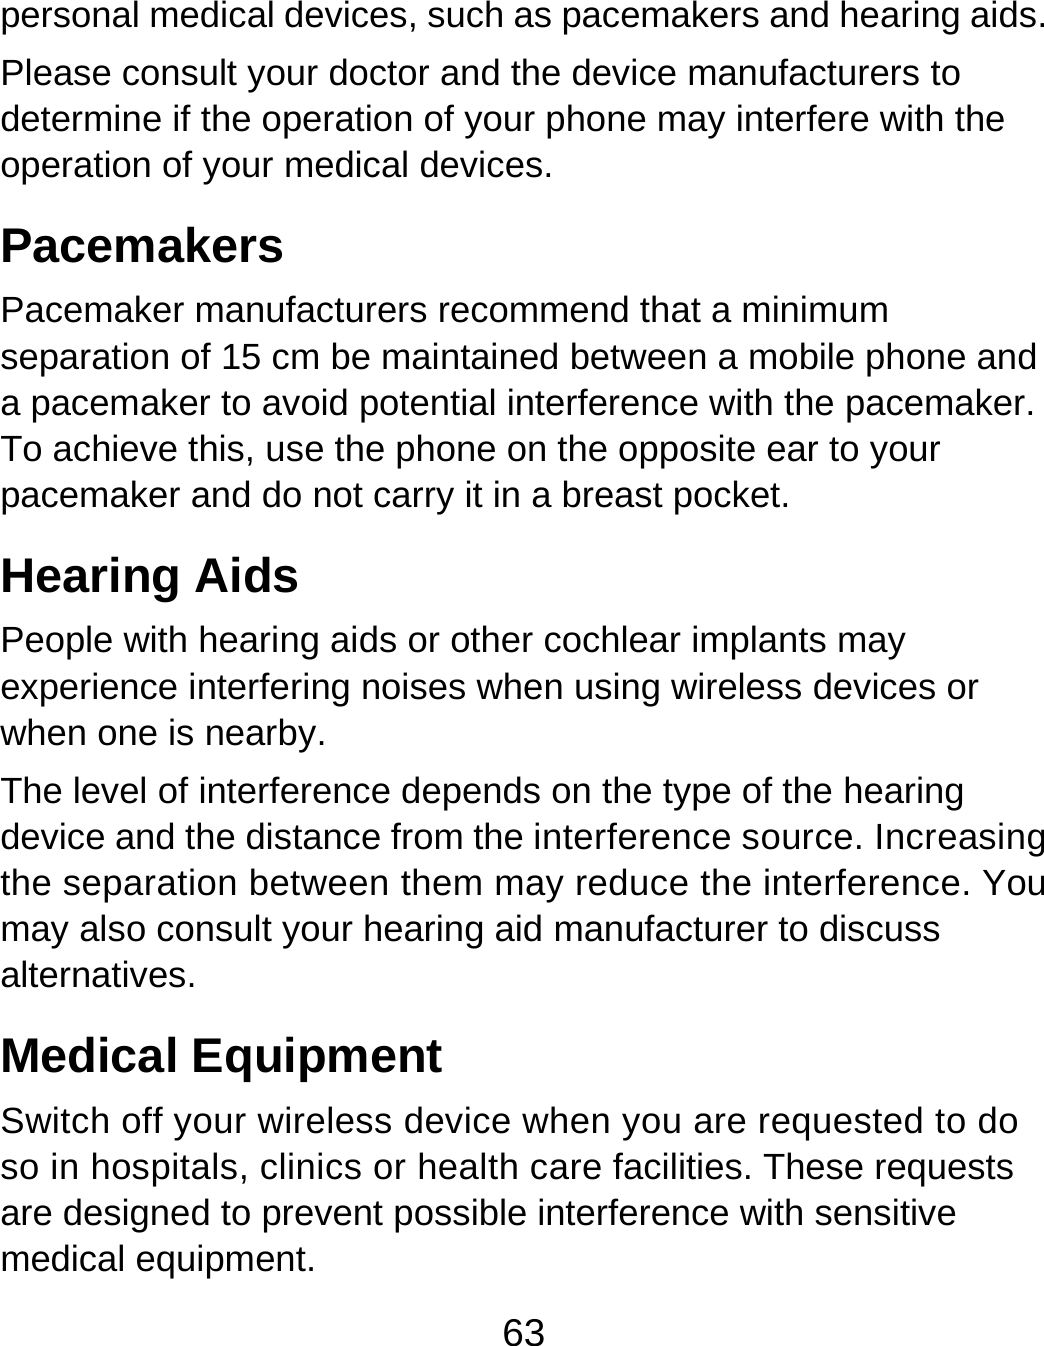 63 personal medical devices, such as pacemakers and hearing aids. Please consult your doctor and the device manufacturers to determine if the operation of your phone may interfere with the operation of your medical devices. Pacemakers Pacemaker manufacturers recommend that a minimum separation of 15 cm be maintained between a mobile phone and a pacemaker to avoid potential interference with the pacemaker. To achieve this, use the phone on the opposite ear to your pacemaker and do not carry it in a breast pocket. Hearing Aids People with hearing aids or other cochlear implants may experience interfering noises when using wireless devices or when one is nearby. The level of interference depends on the type of the hearing device and the distance from the interference source. Increasing the separation between them may reduce the interference. You may also consult your hearing aid manufacturer to discuss alternatives. Medical Equipment Switch off your wireless device when you are requested to do so in hospitals, clinics or health care facilities. These requests are designed to prevent possible interference with sensitive medical equipment. 